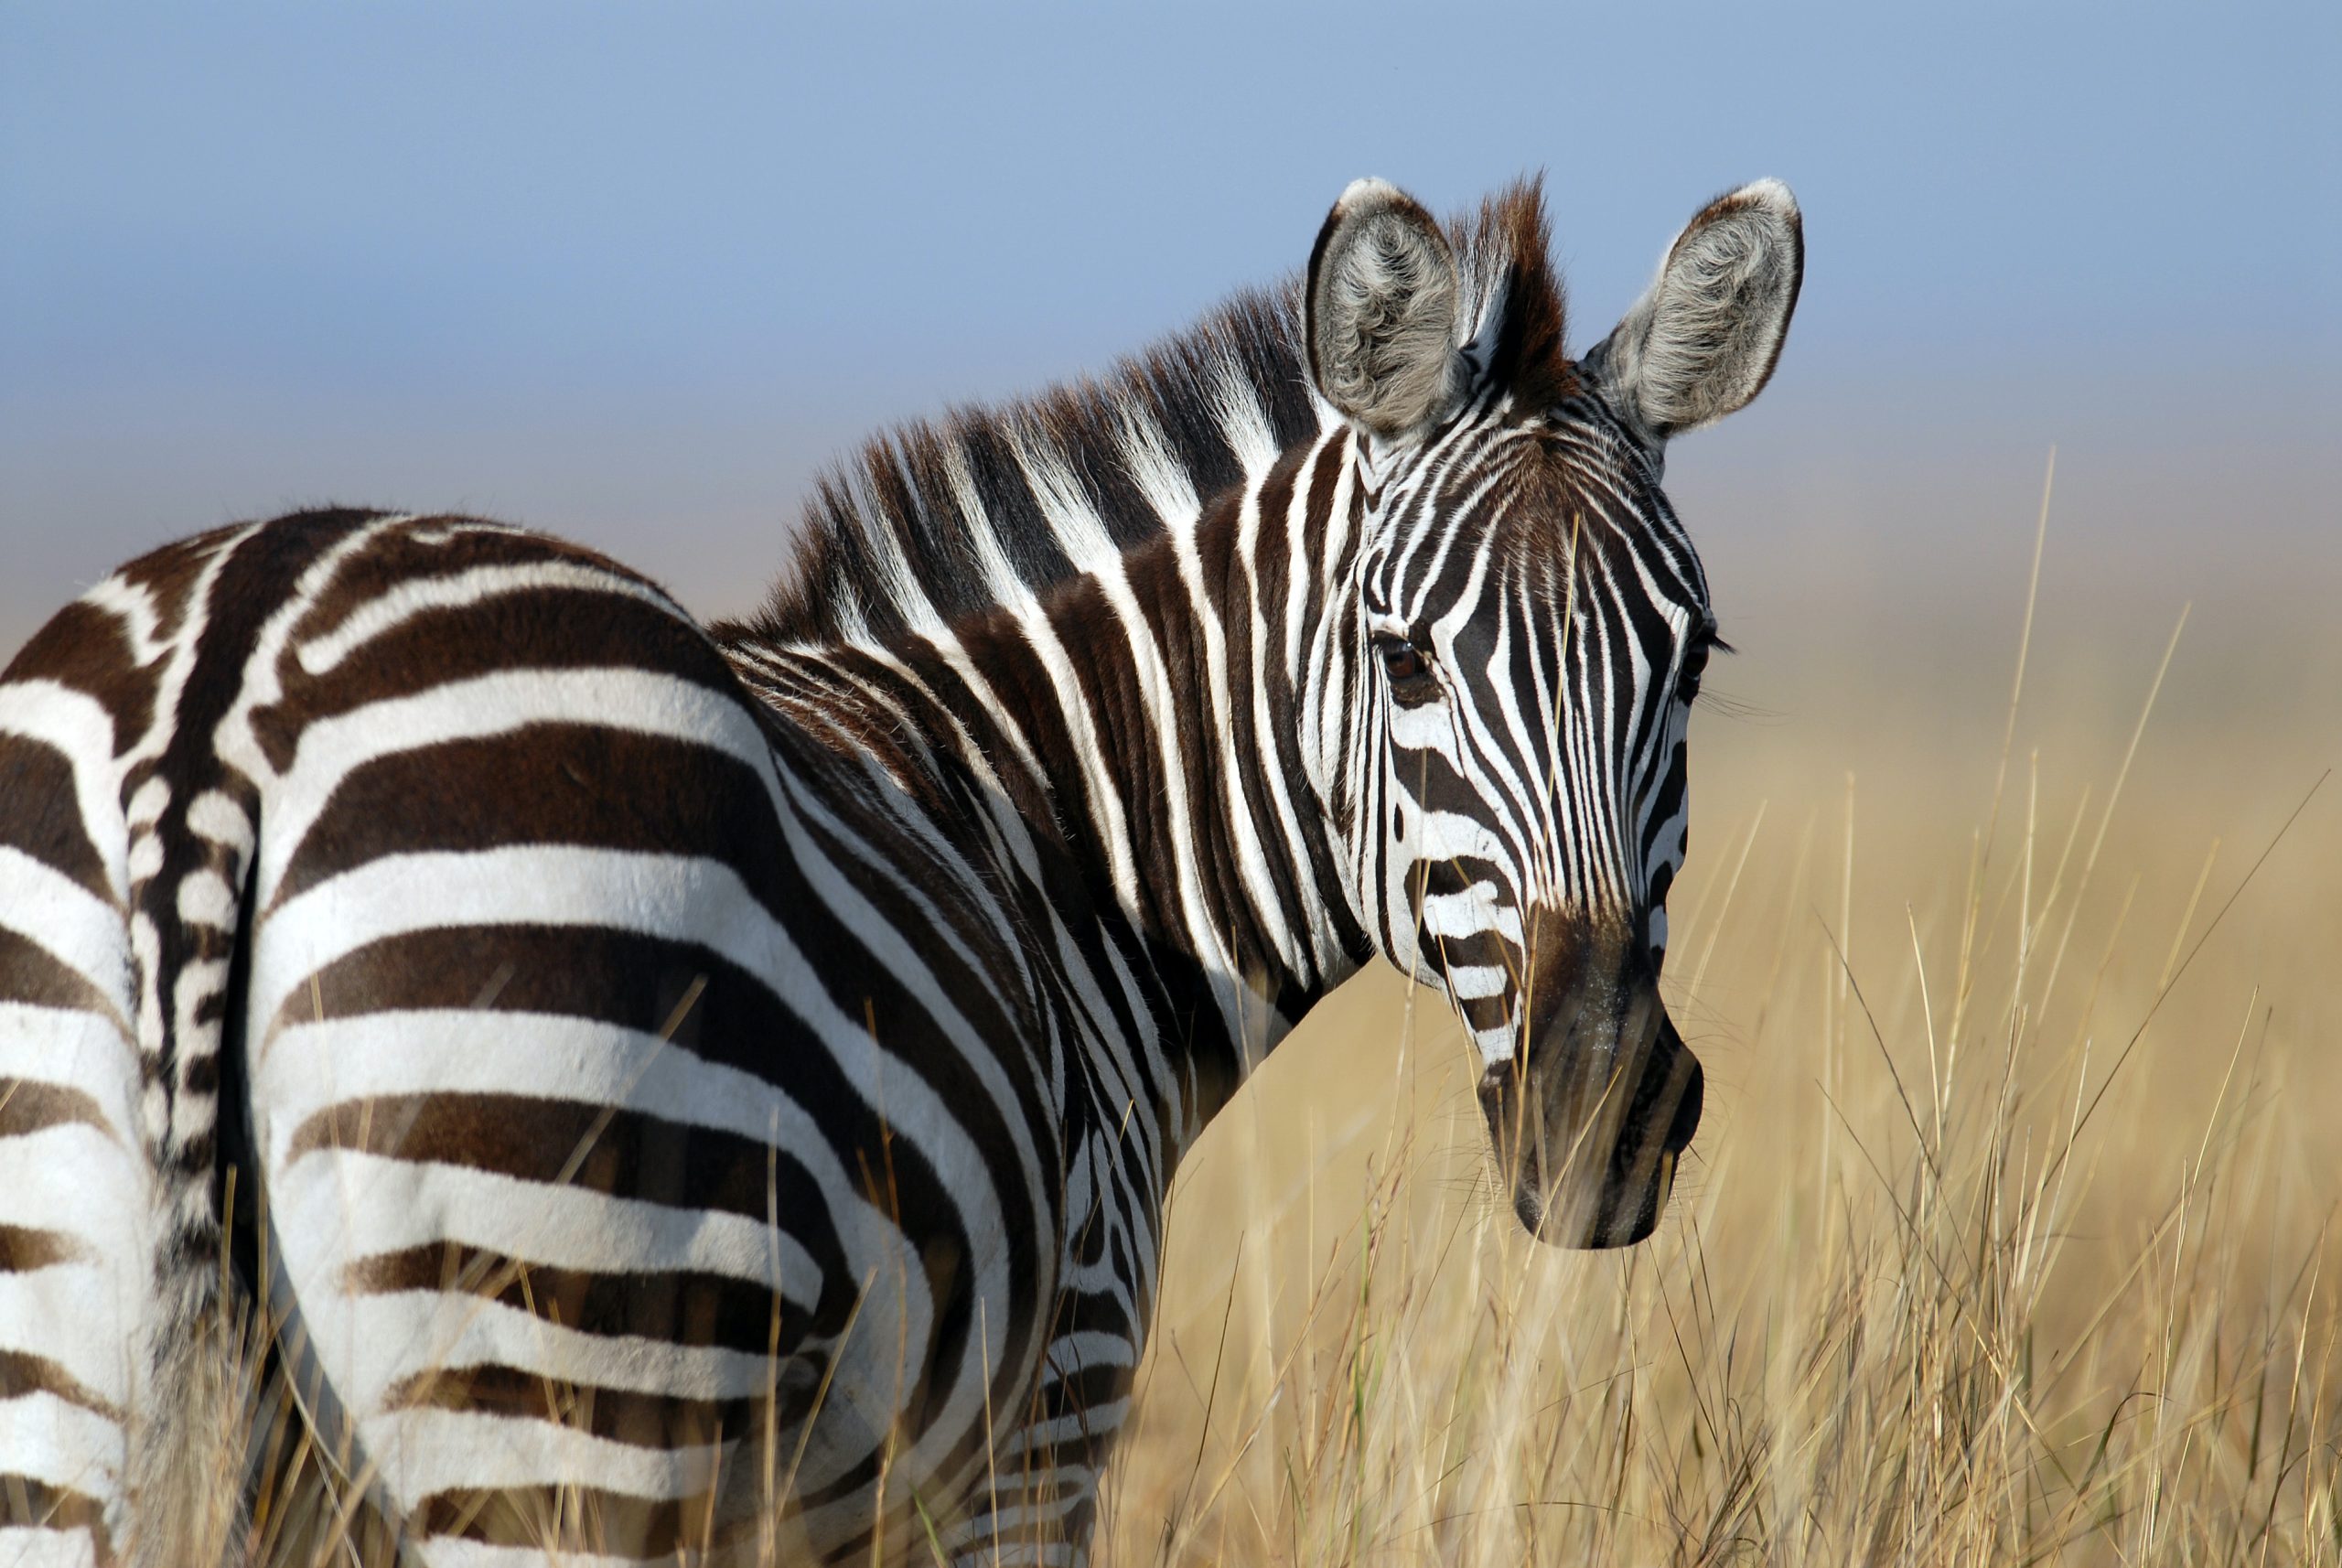 Why Are Zebras Striped?